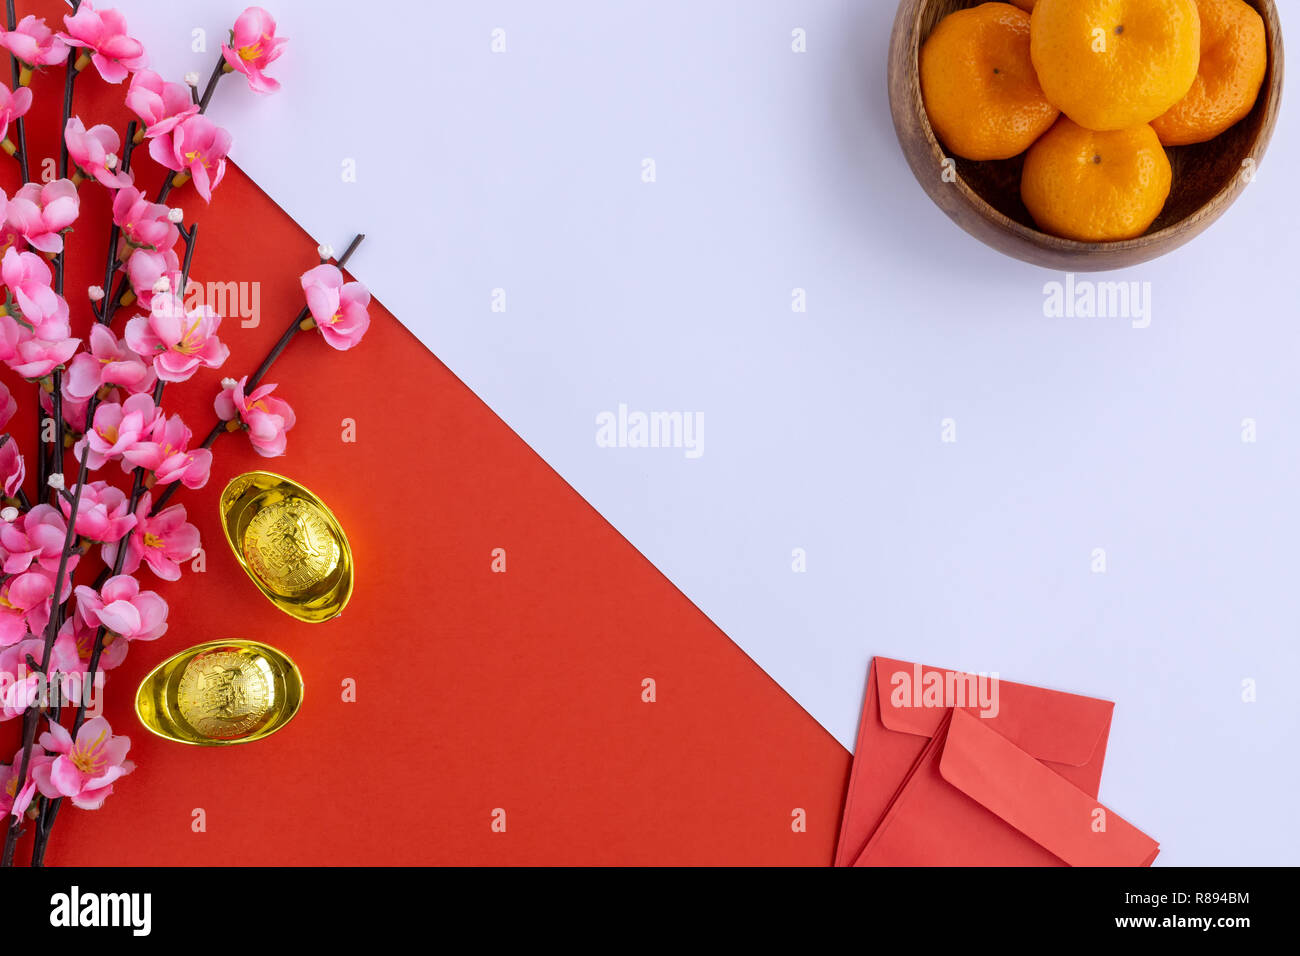 Flat Lay Chinese New Year Background - Cherry Blossom, Mandarin Orange, Red Envelop and Golden Ingots on dual tone background red and white. Stock Photo